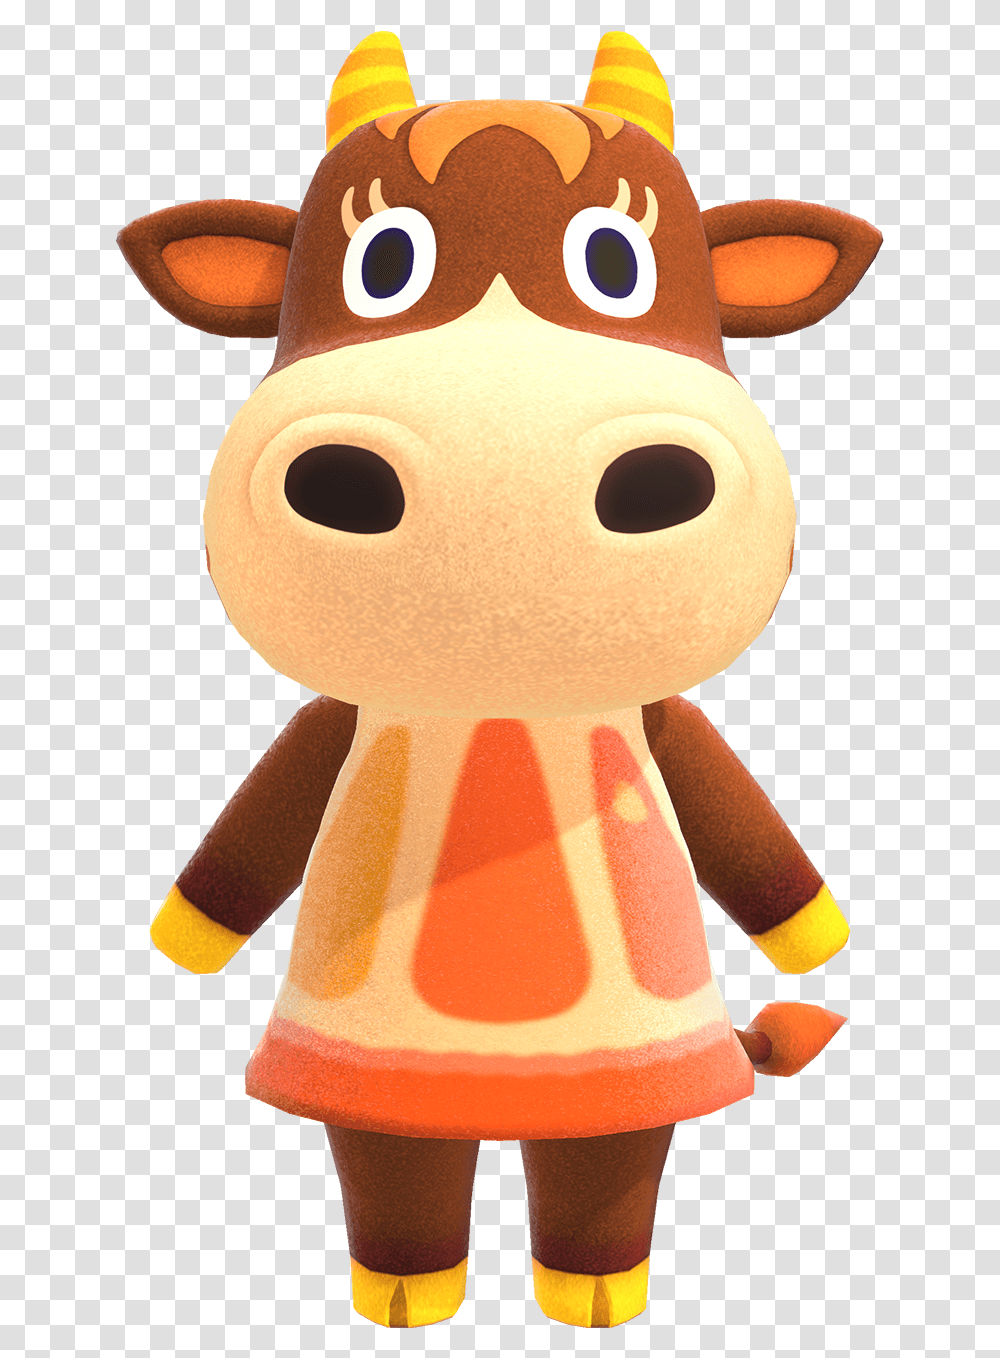 Peta Loves These 'animal Crossing' Art Designs Patty Animal Crossing New Horizons, Toy, Doll, Figurine Transparent Png